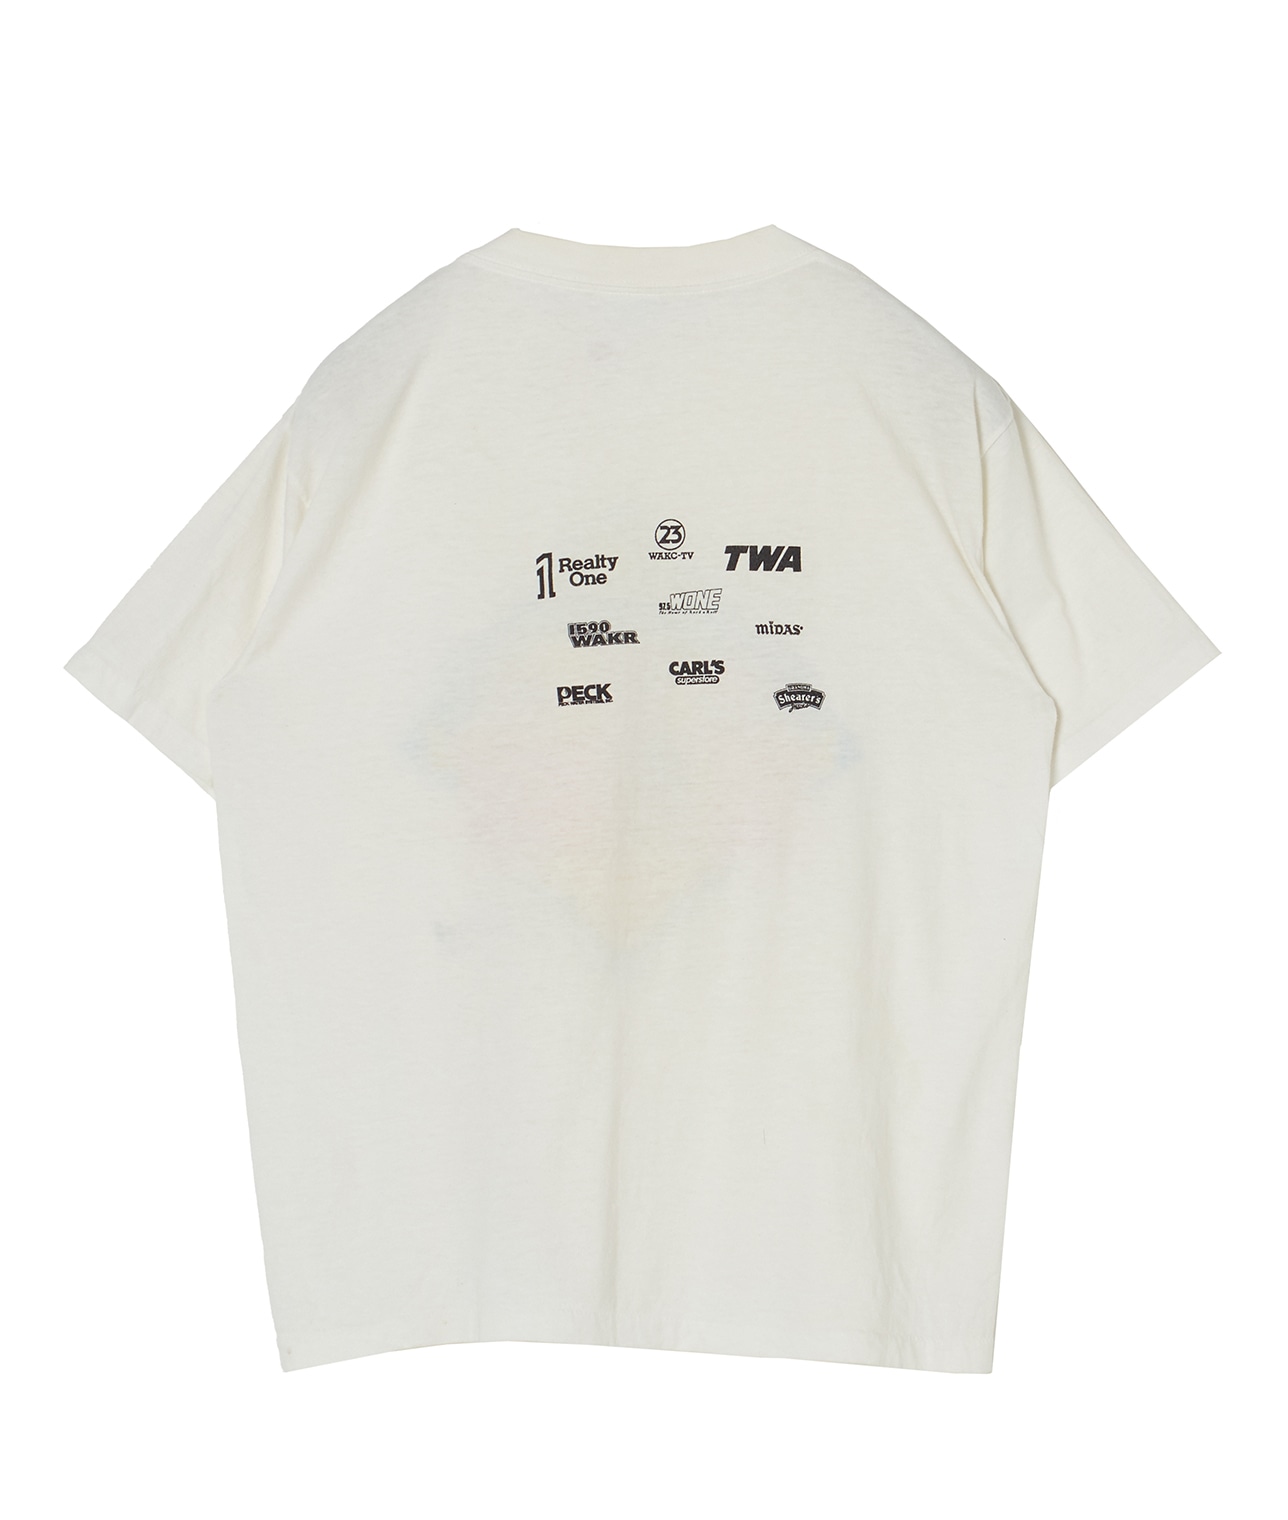 USED/THE SUPER CITIES WALK/プリントTシャツ 詳細画像 WHITE 2